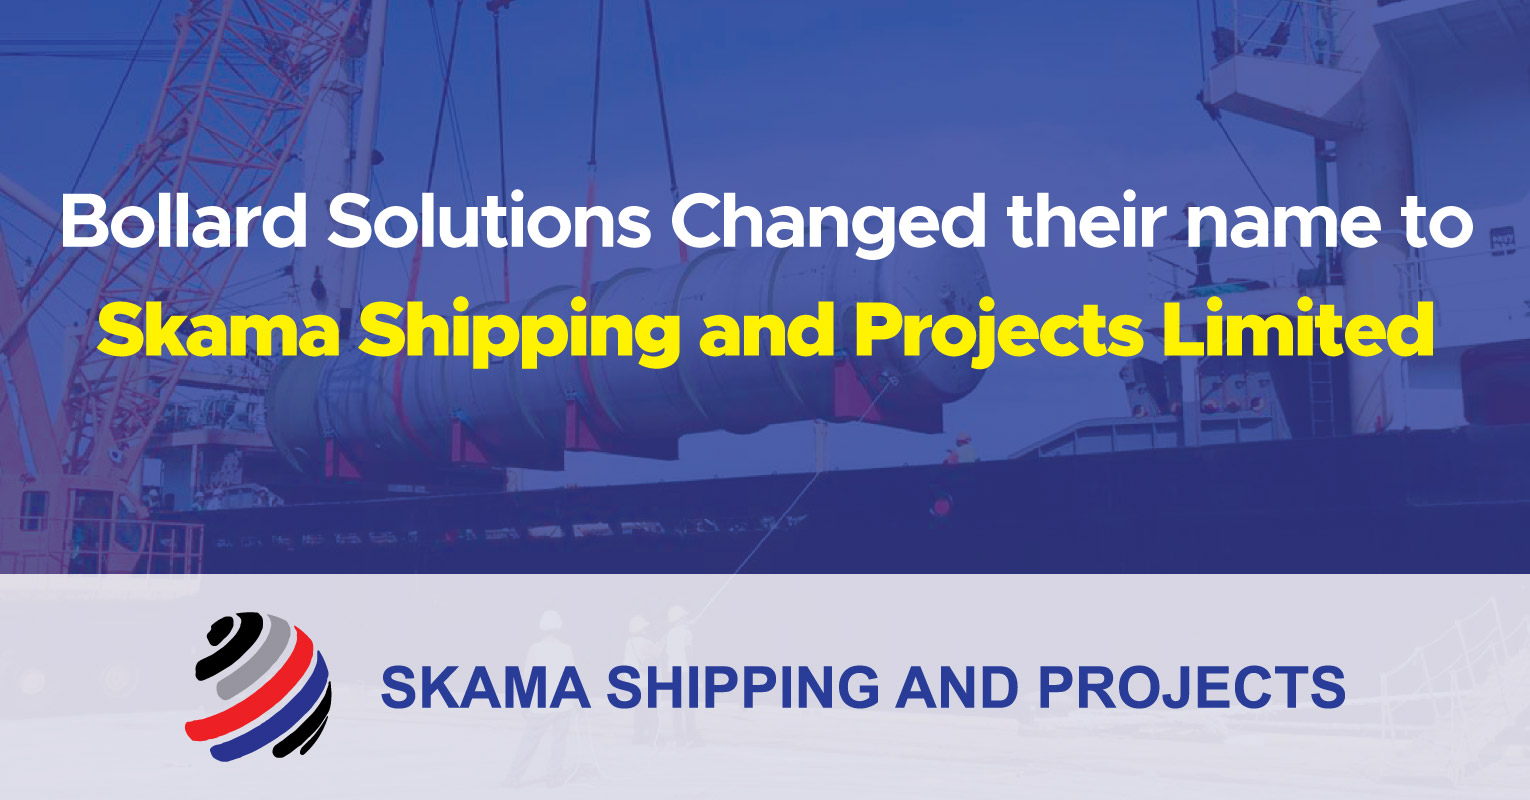 Bollard Solutions Changed their name to Skama Shipping and Projects Myanmar Ltd